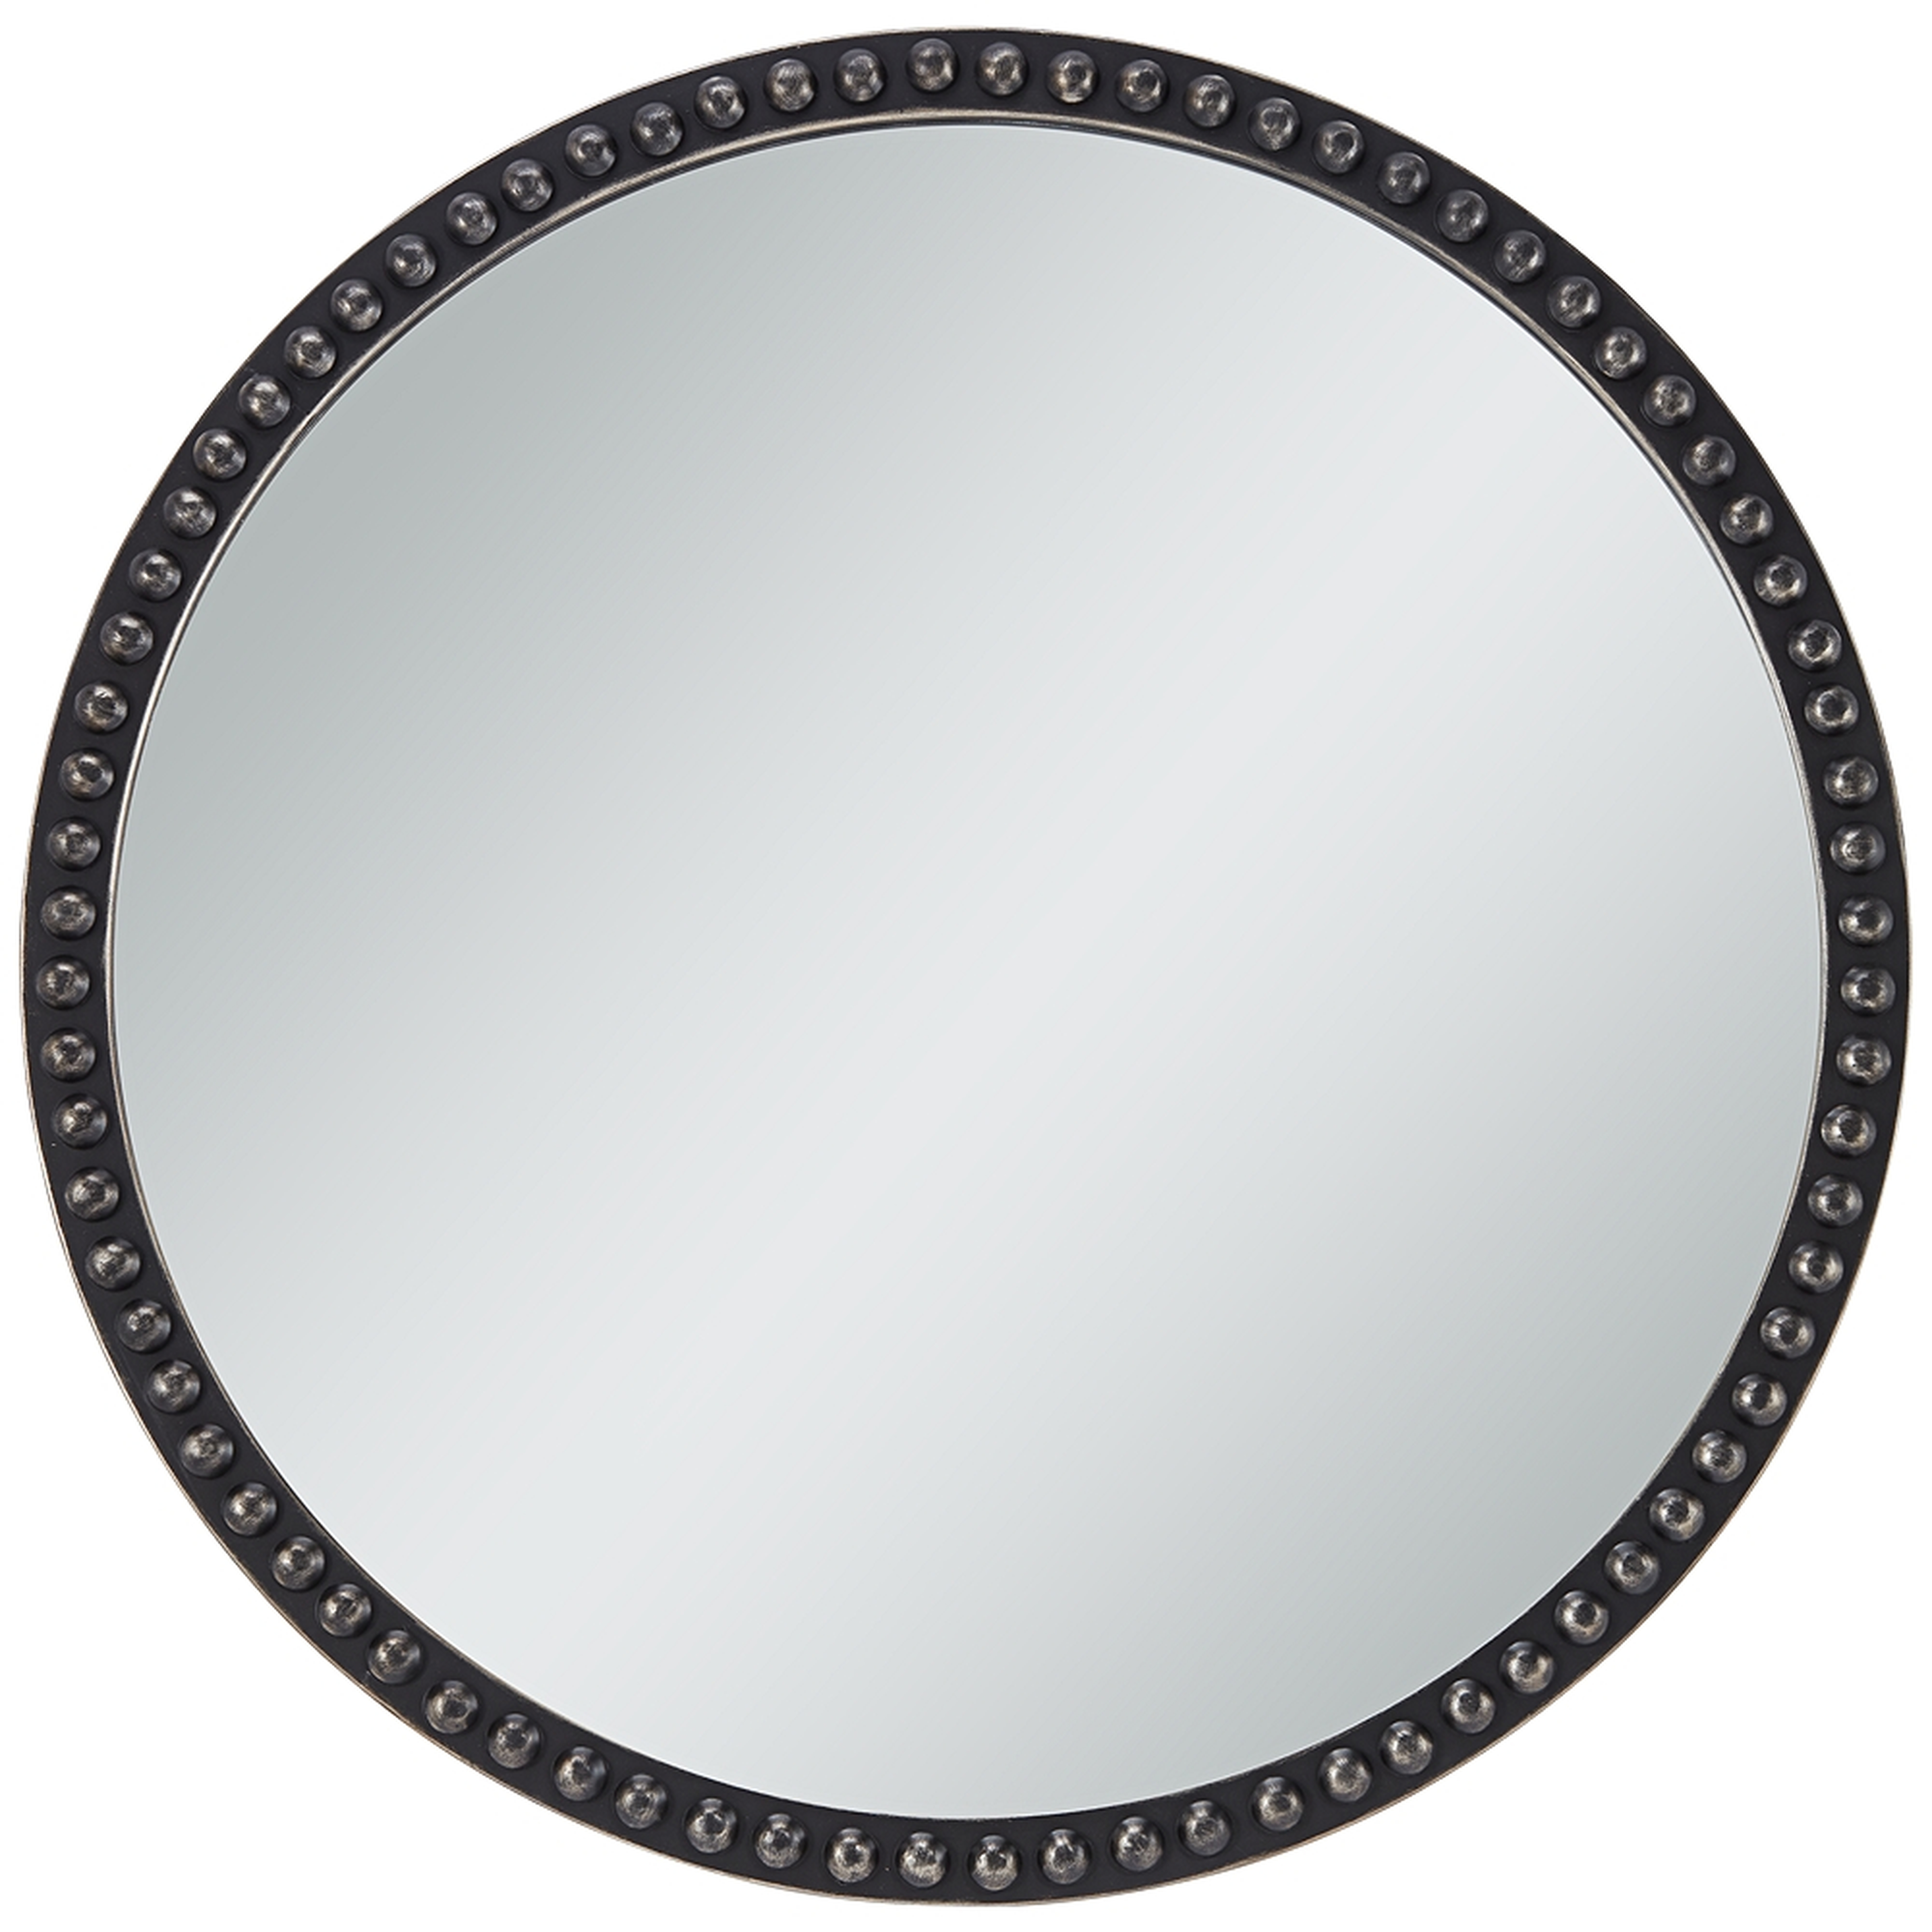 Corwin Black 34" Round Metal Framed Wall Mirror - Style # 87X71 - Lamps Plus